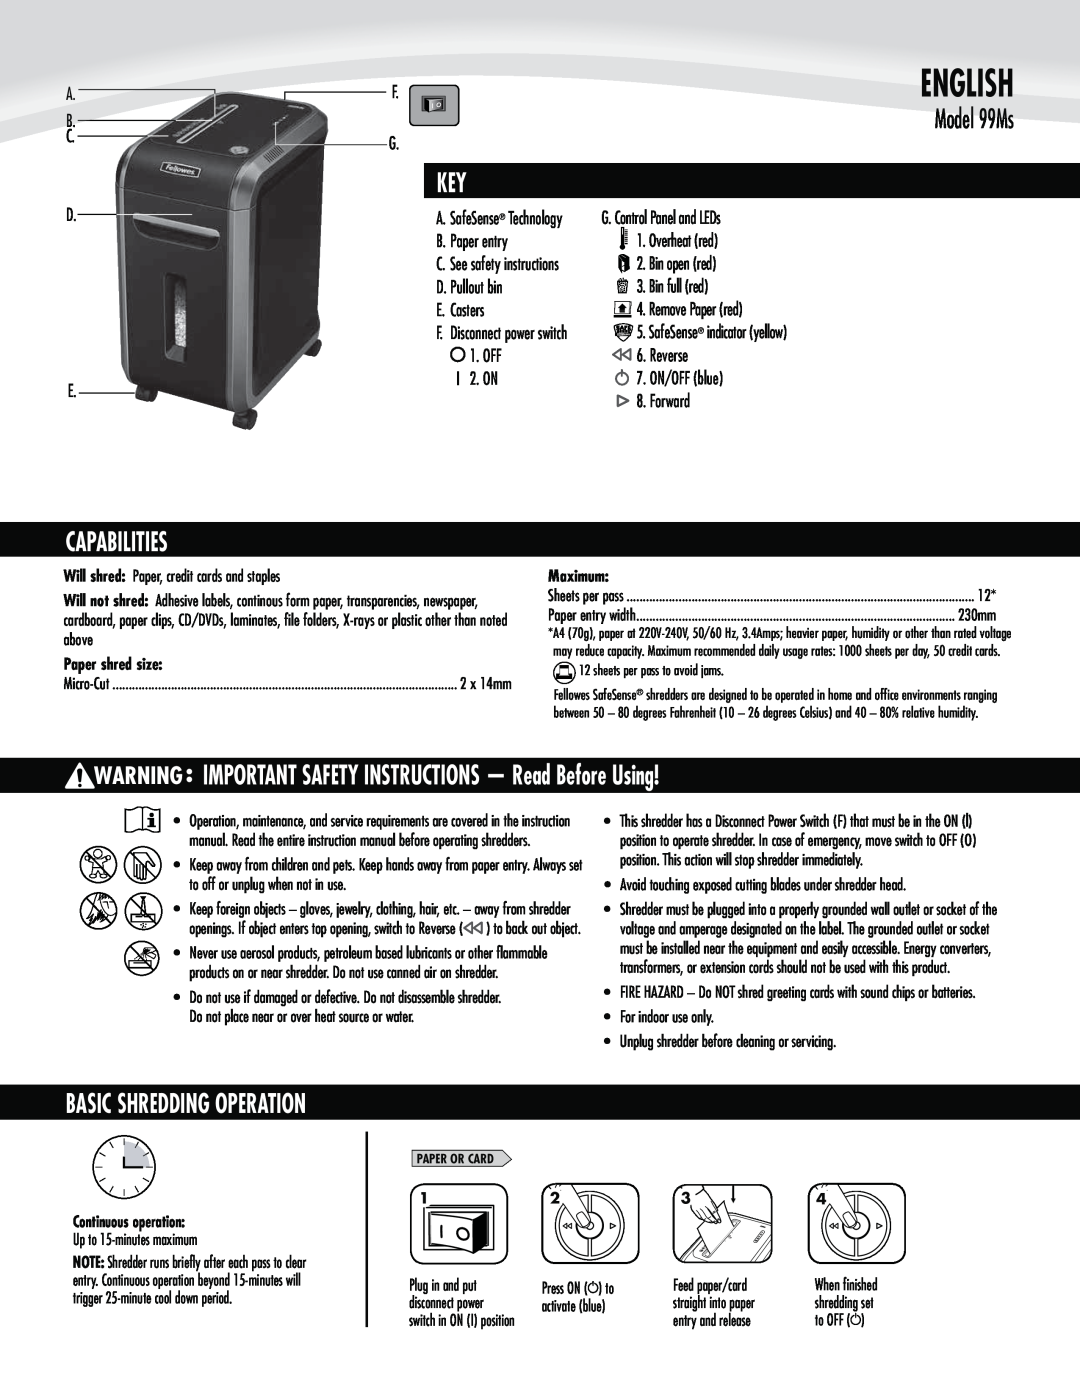 Fellowes 99Ms manual Capabilities, IMPORTANT SAFETY INSTRUCTIONS - Read Before Using, Basic Shredding Operation, English 